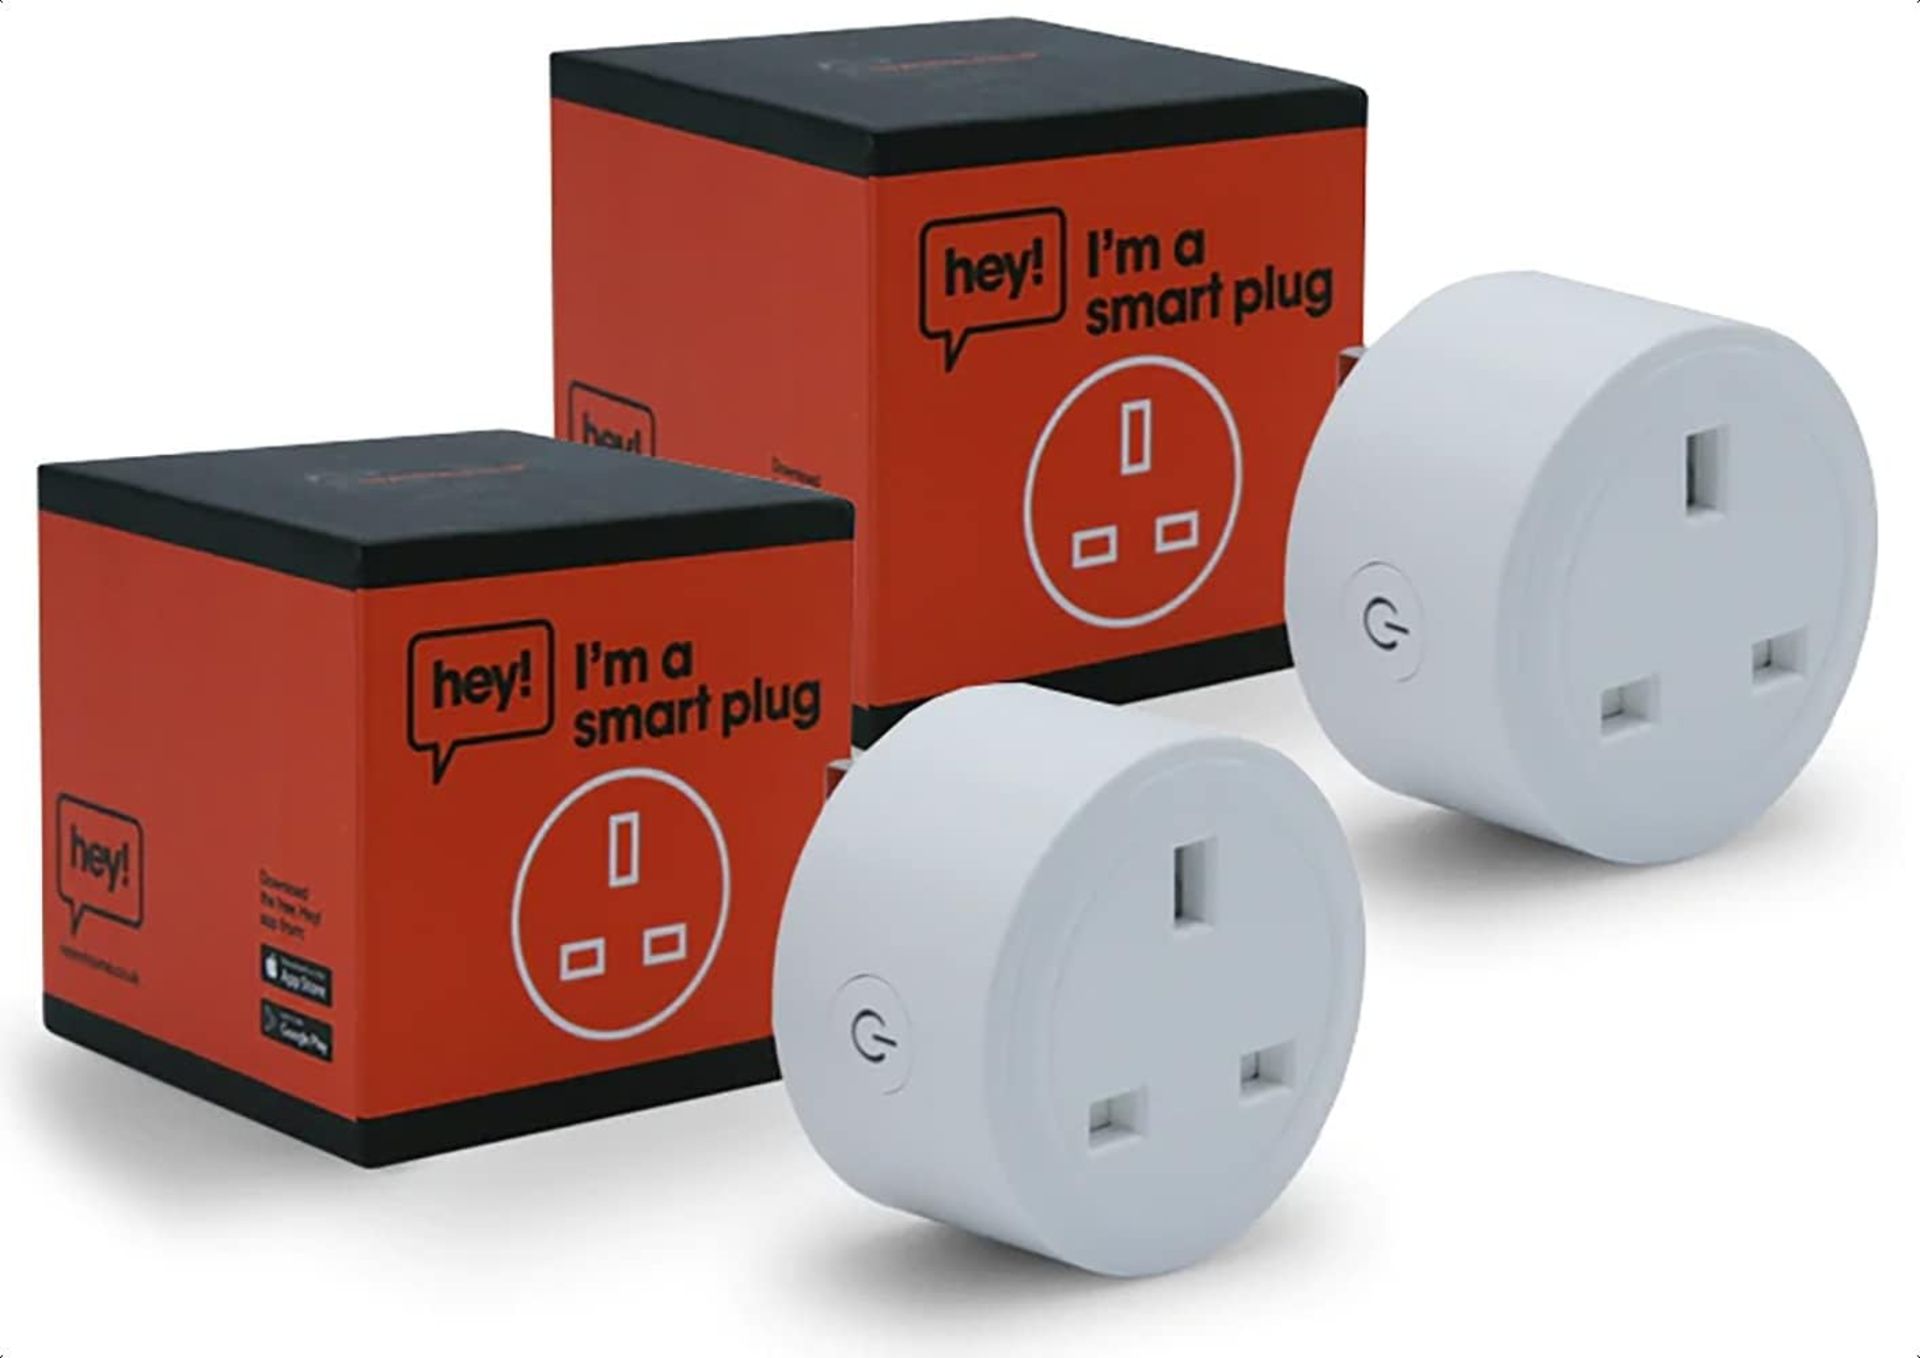 8x NEW & BOXED HEY! SMART Plug 2 Pack for Alexa and Google Home Devices. RRP £32.99 EACH. Smart Plug